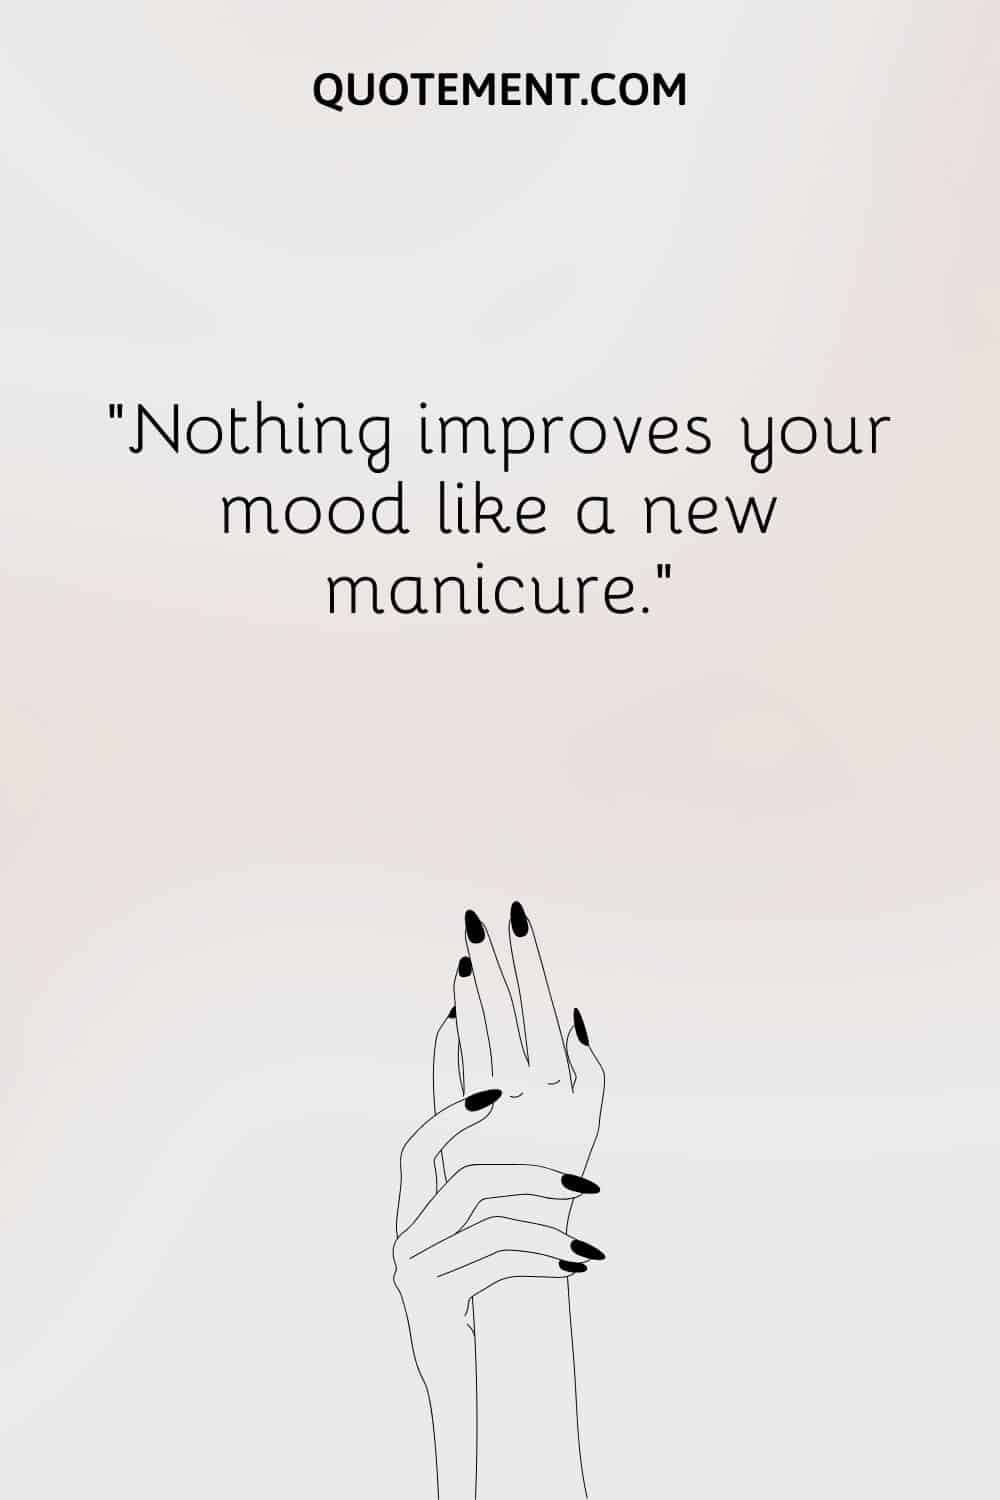 Nothing improves your mood like a new manicure